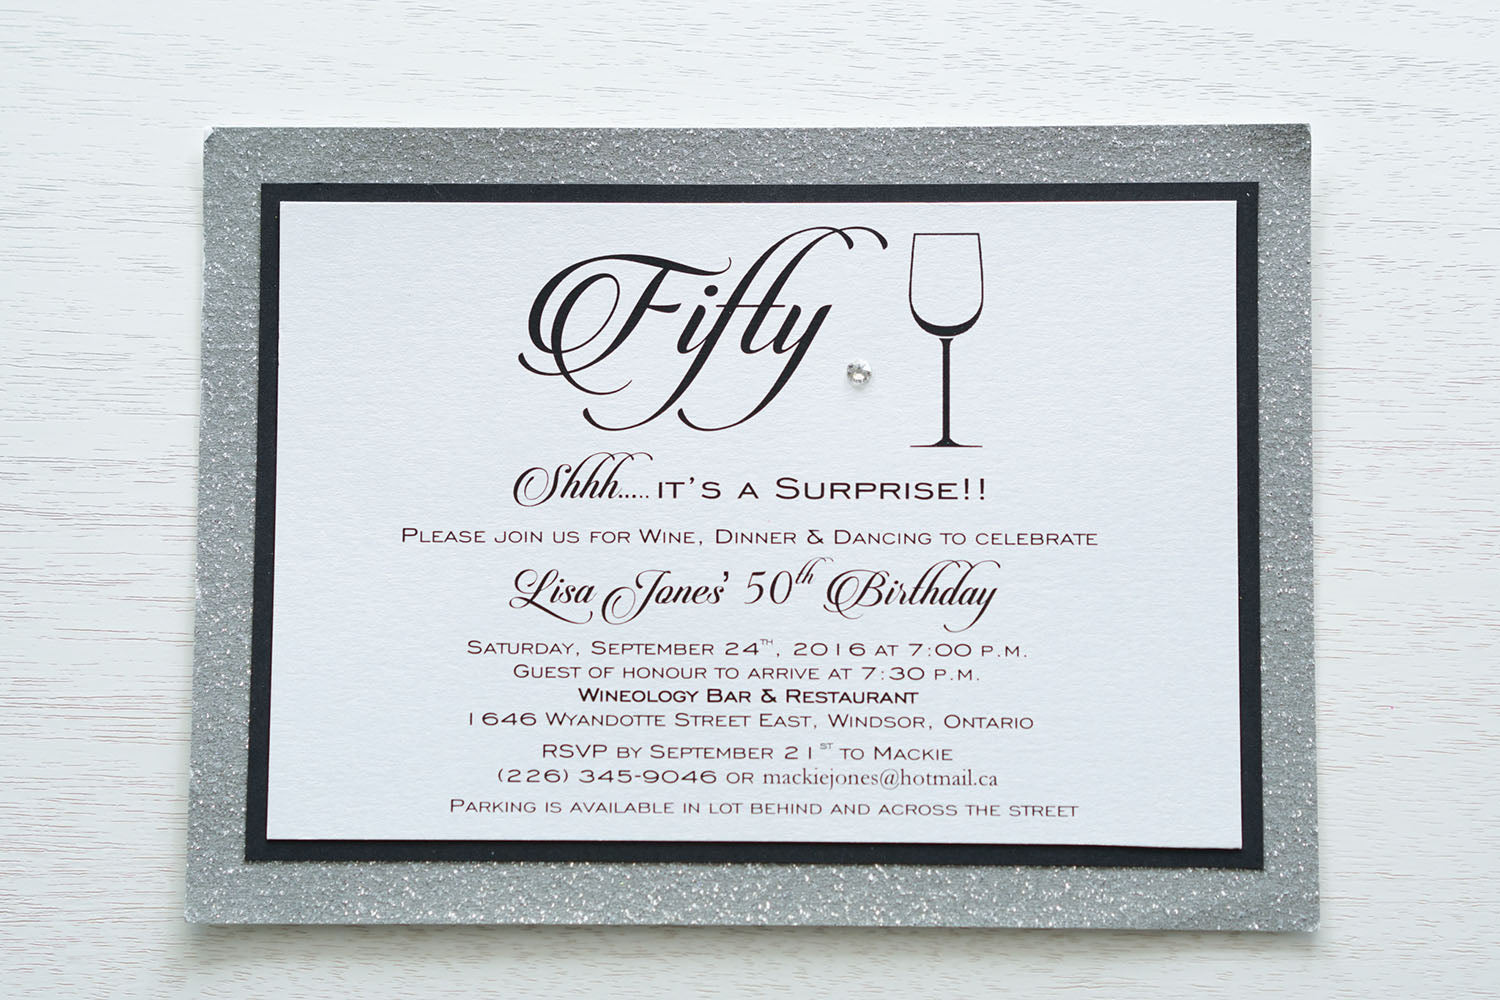 alt="Modern birthday invitation features a white pearlescent shimmer card stock on matte black and silver glitter card stock, a fun wine glass image, fifty written in script and is finished with a jewel detail"